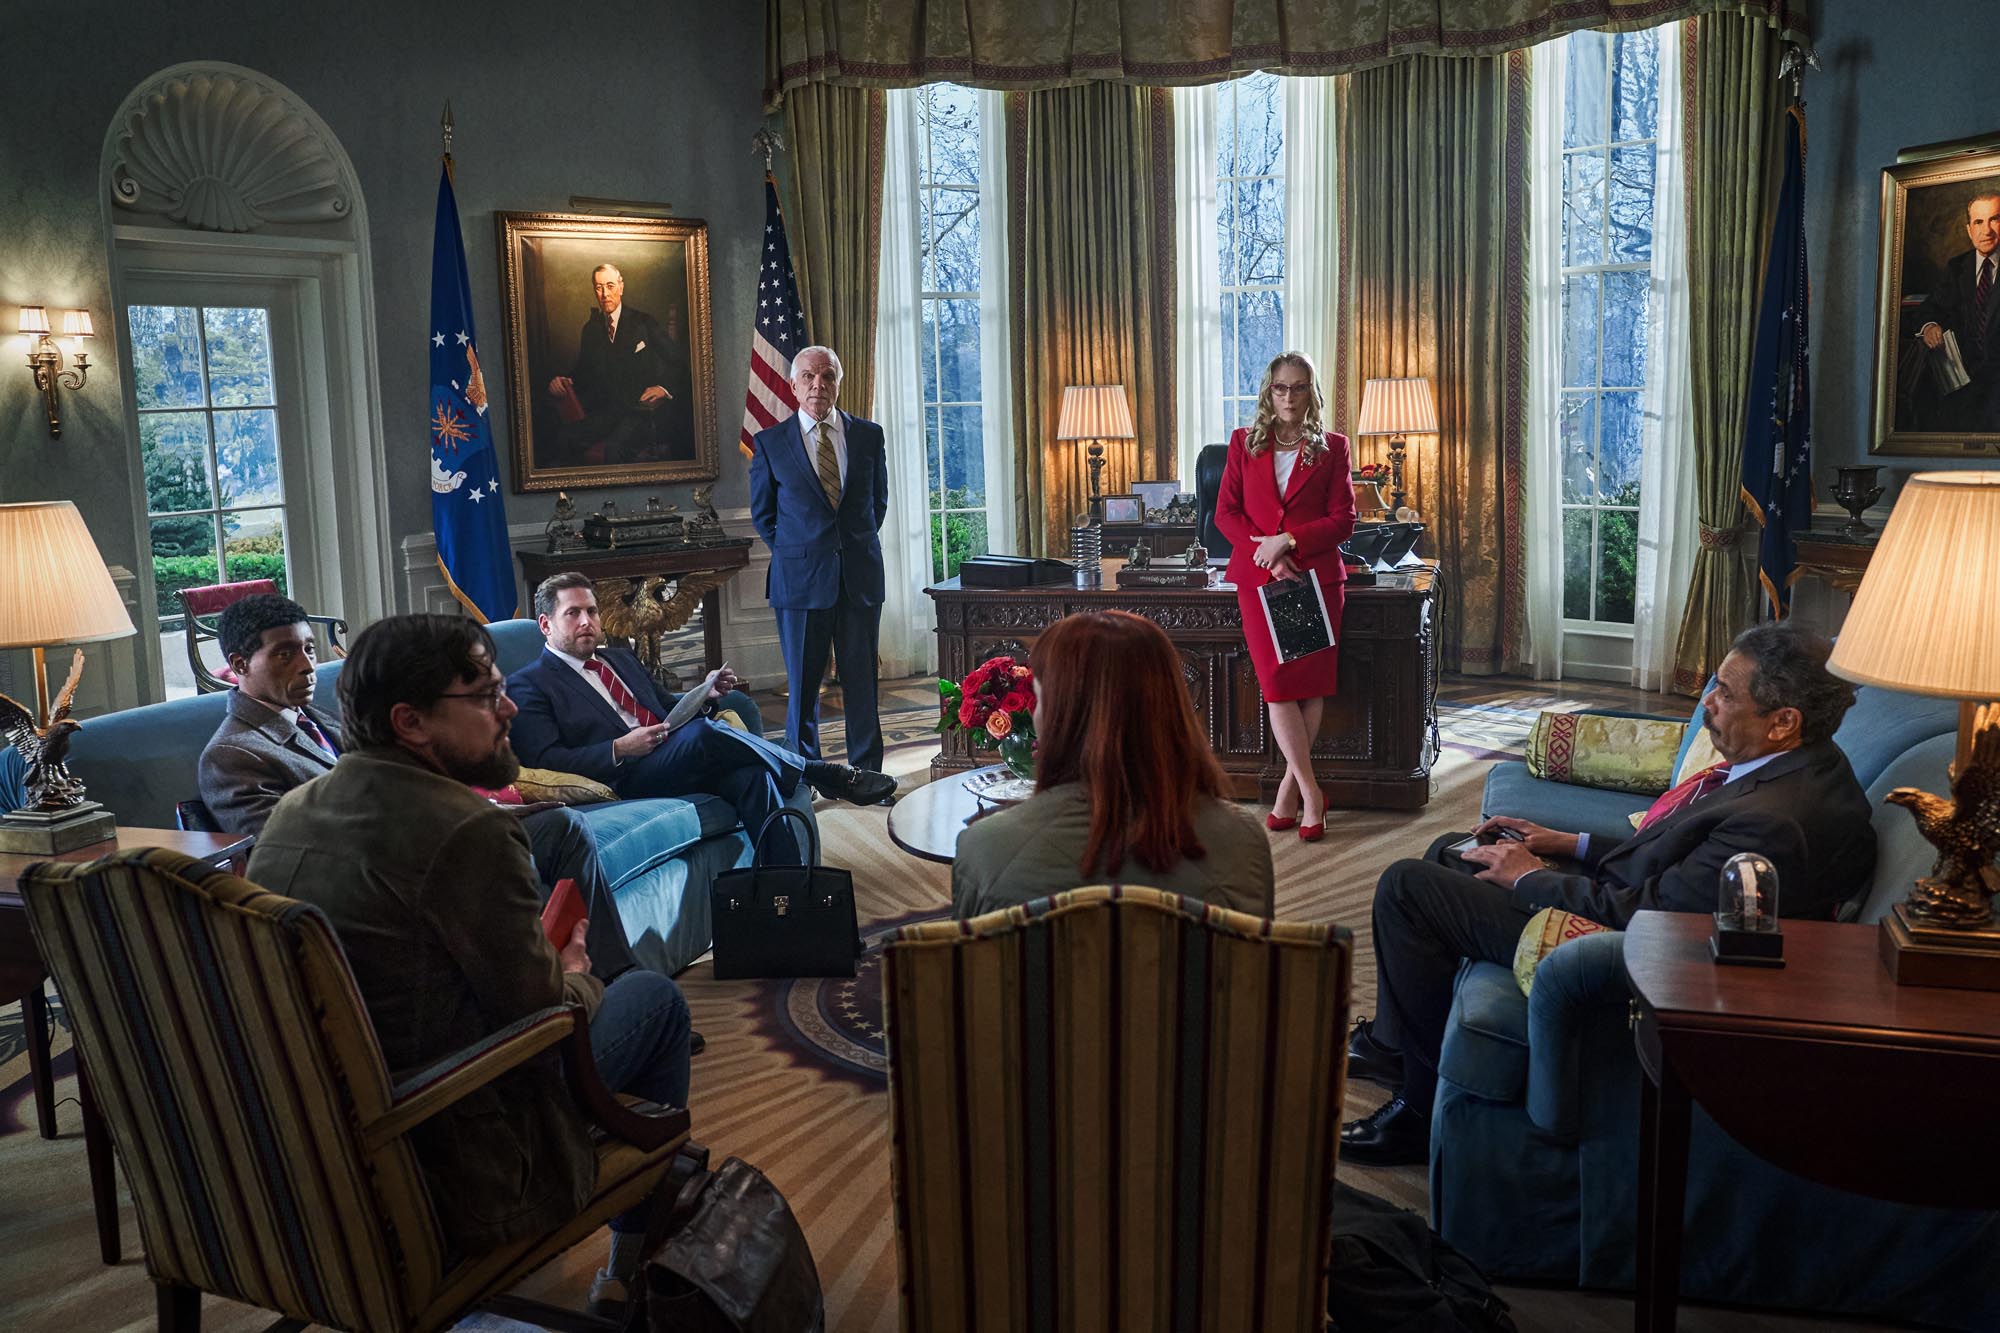 A meeting in the White House in 'Don't Look Up'